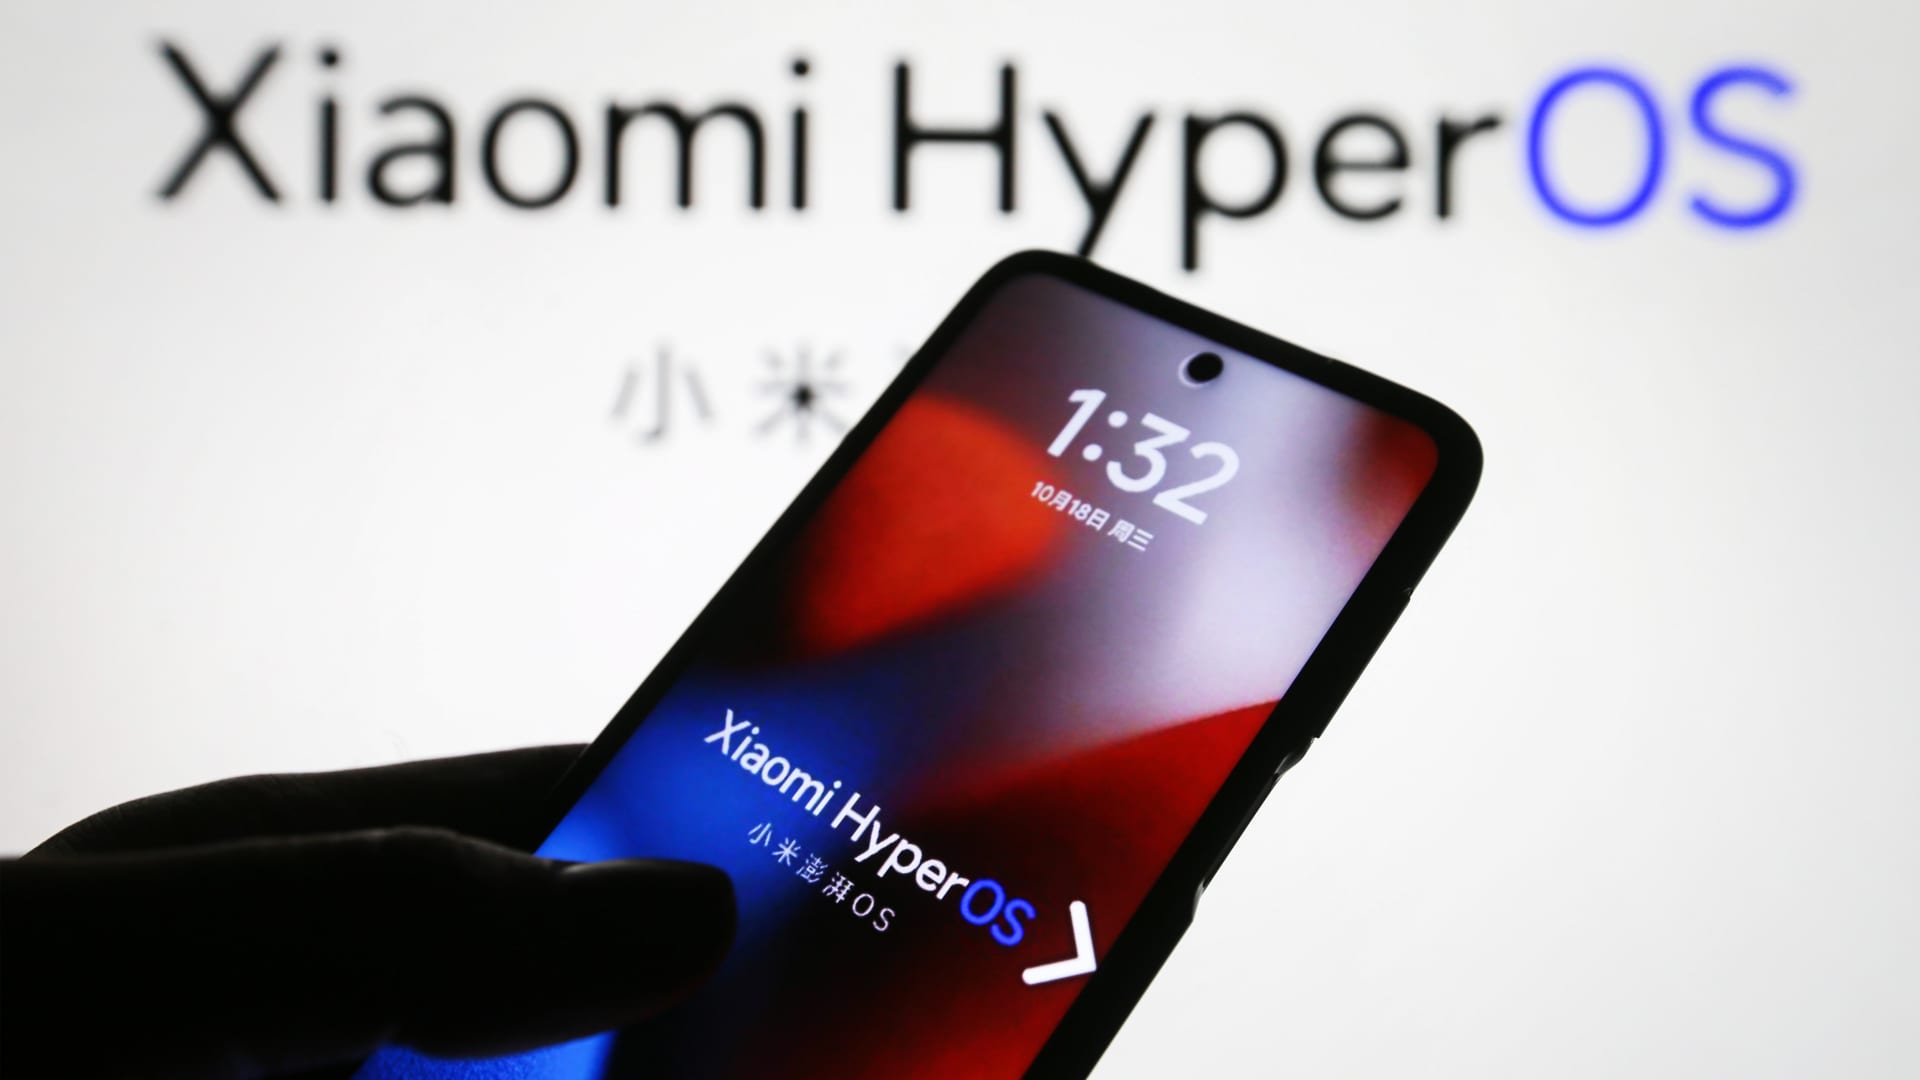 Chinese smartphone company Xiaomi releases HyperOS as it plans car